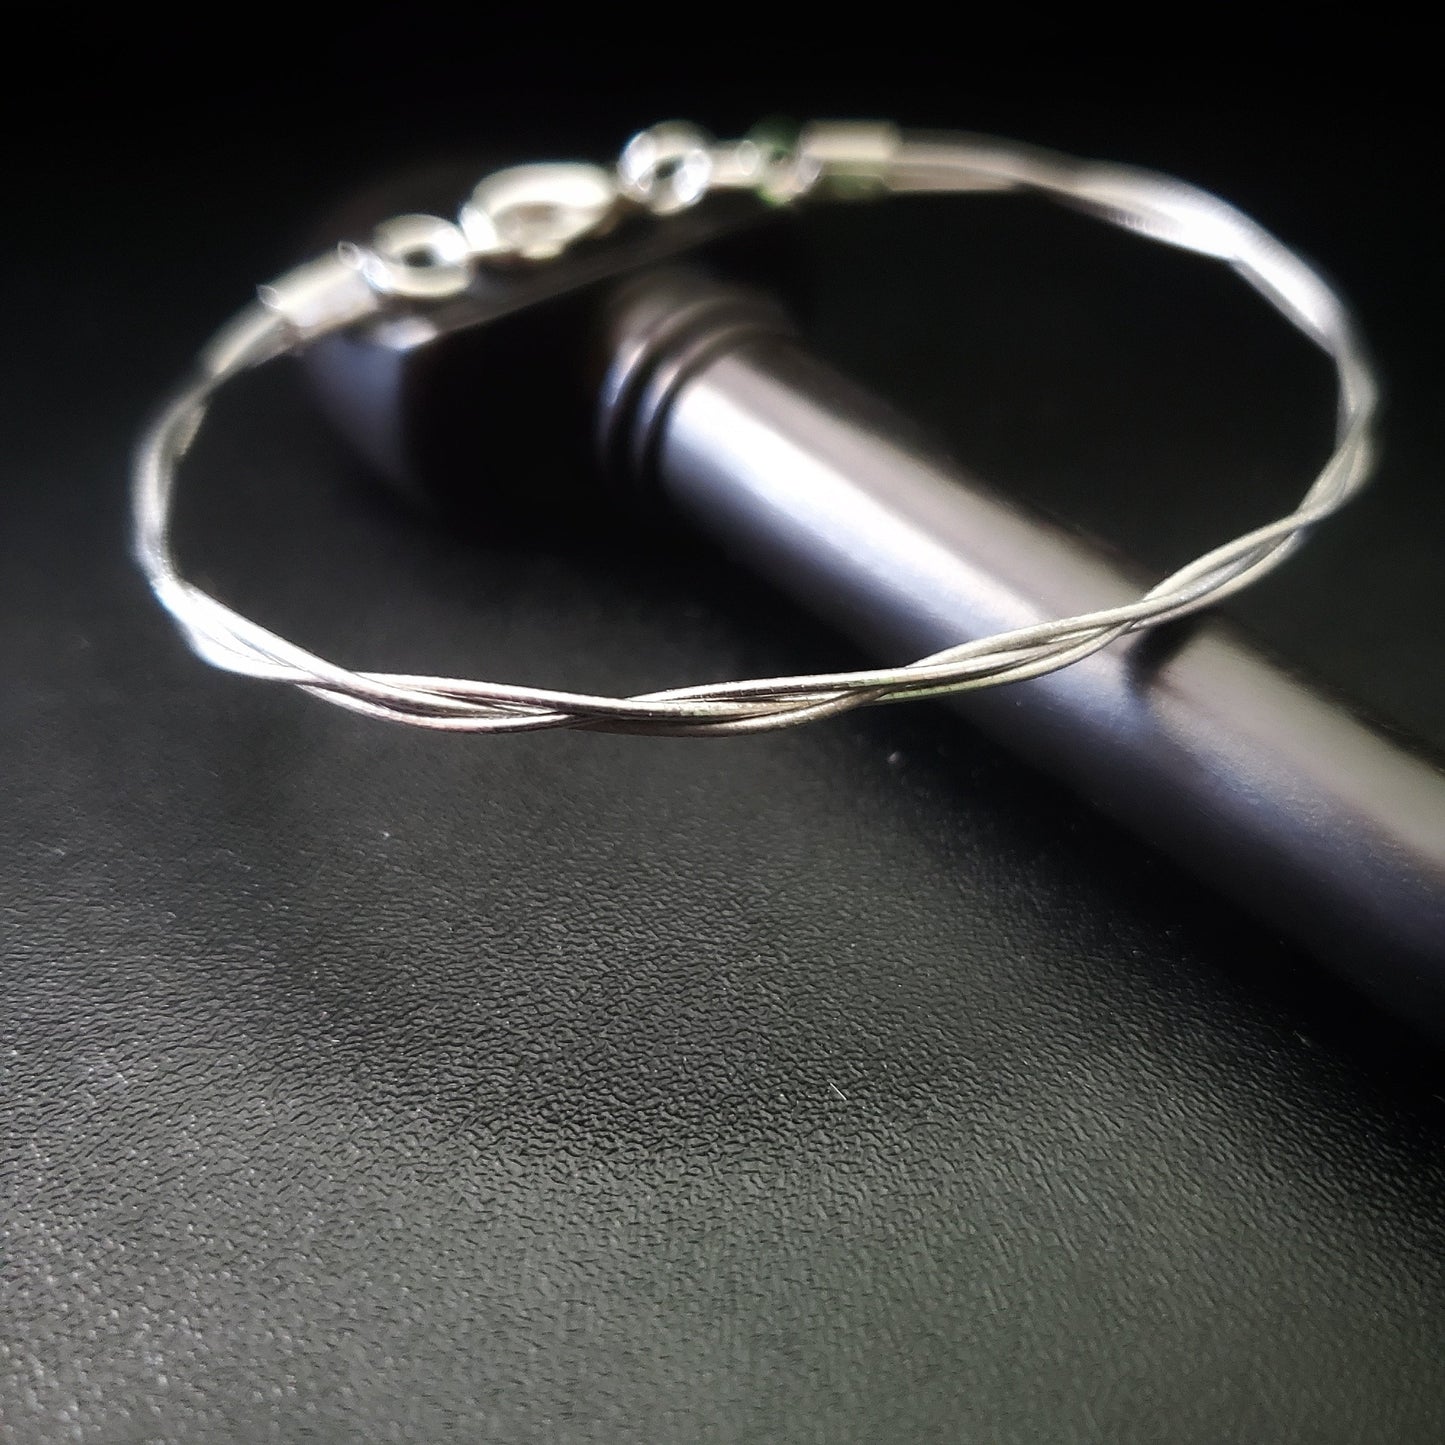 silver coloured bracelet made from 3 cello strings braided together sitting on a black cello tuning peg on a black background